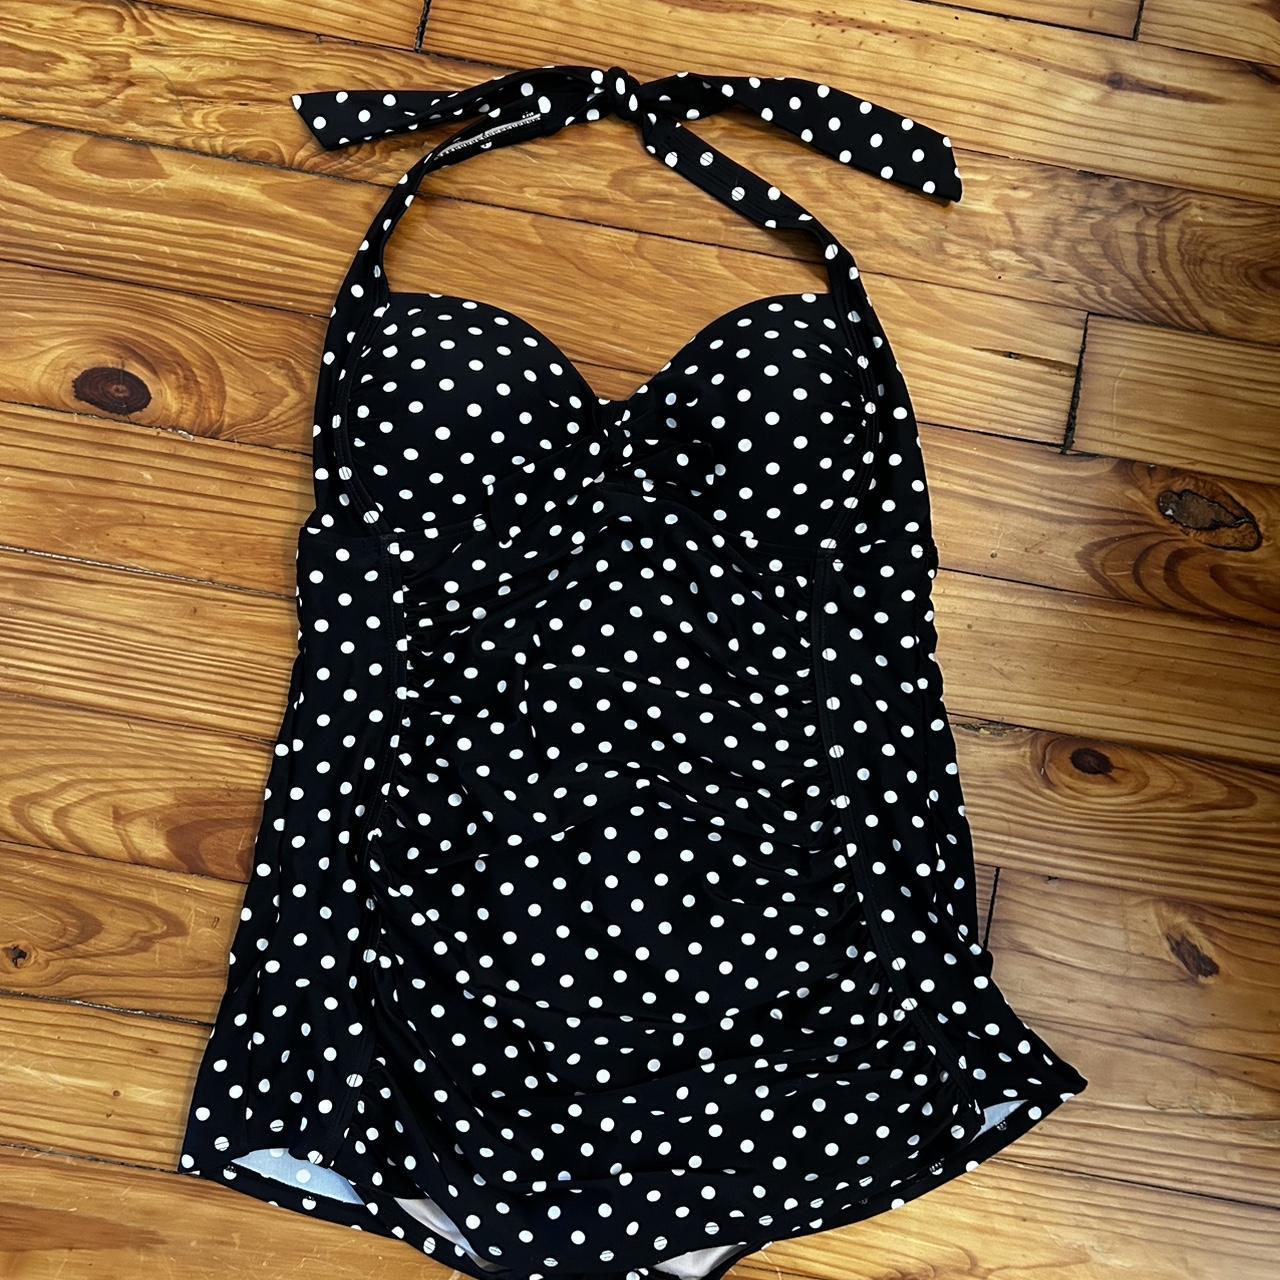 Skirt one piece swimsuit. Has a classic style vibe. - Depop